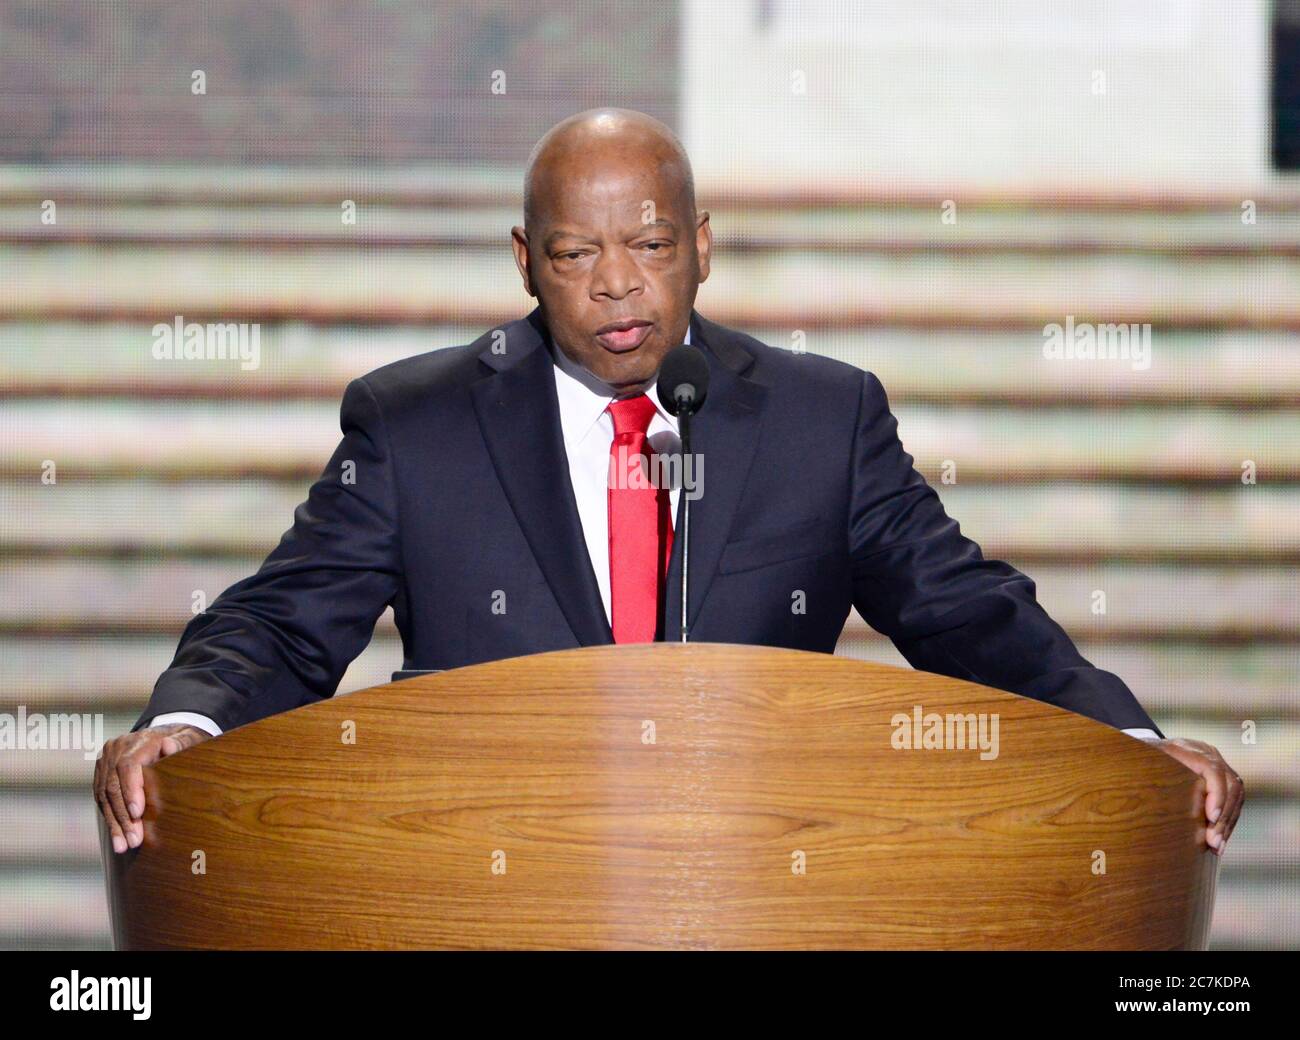 United States Representative John Lewis (Democrat of Georgia) makes remarks at the 2012 Democratic National Convention in Charlotte, North Carolina on Thursday, September 6, 2012. Credit: Ron Sachs/CNP.(RESTRICTION: NO New York or New Jersey Newspapers or newspapers within a 75 mile radius of New York City) | usage worldwide Stock Photo